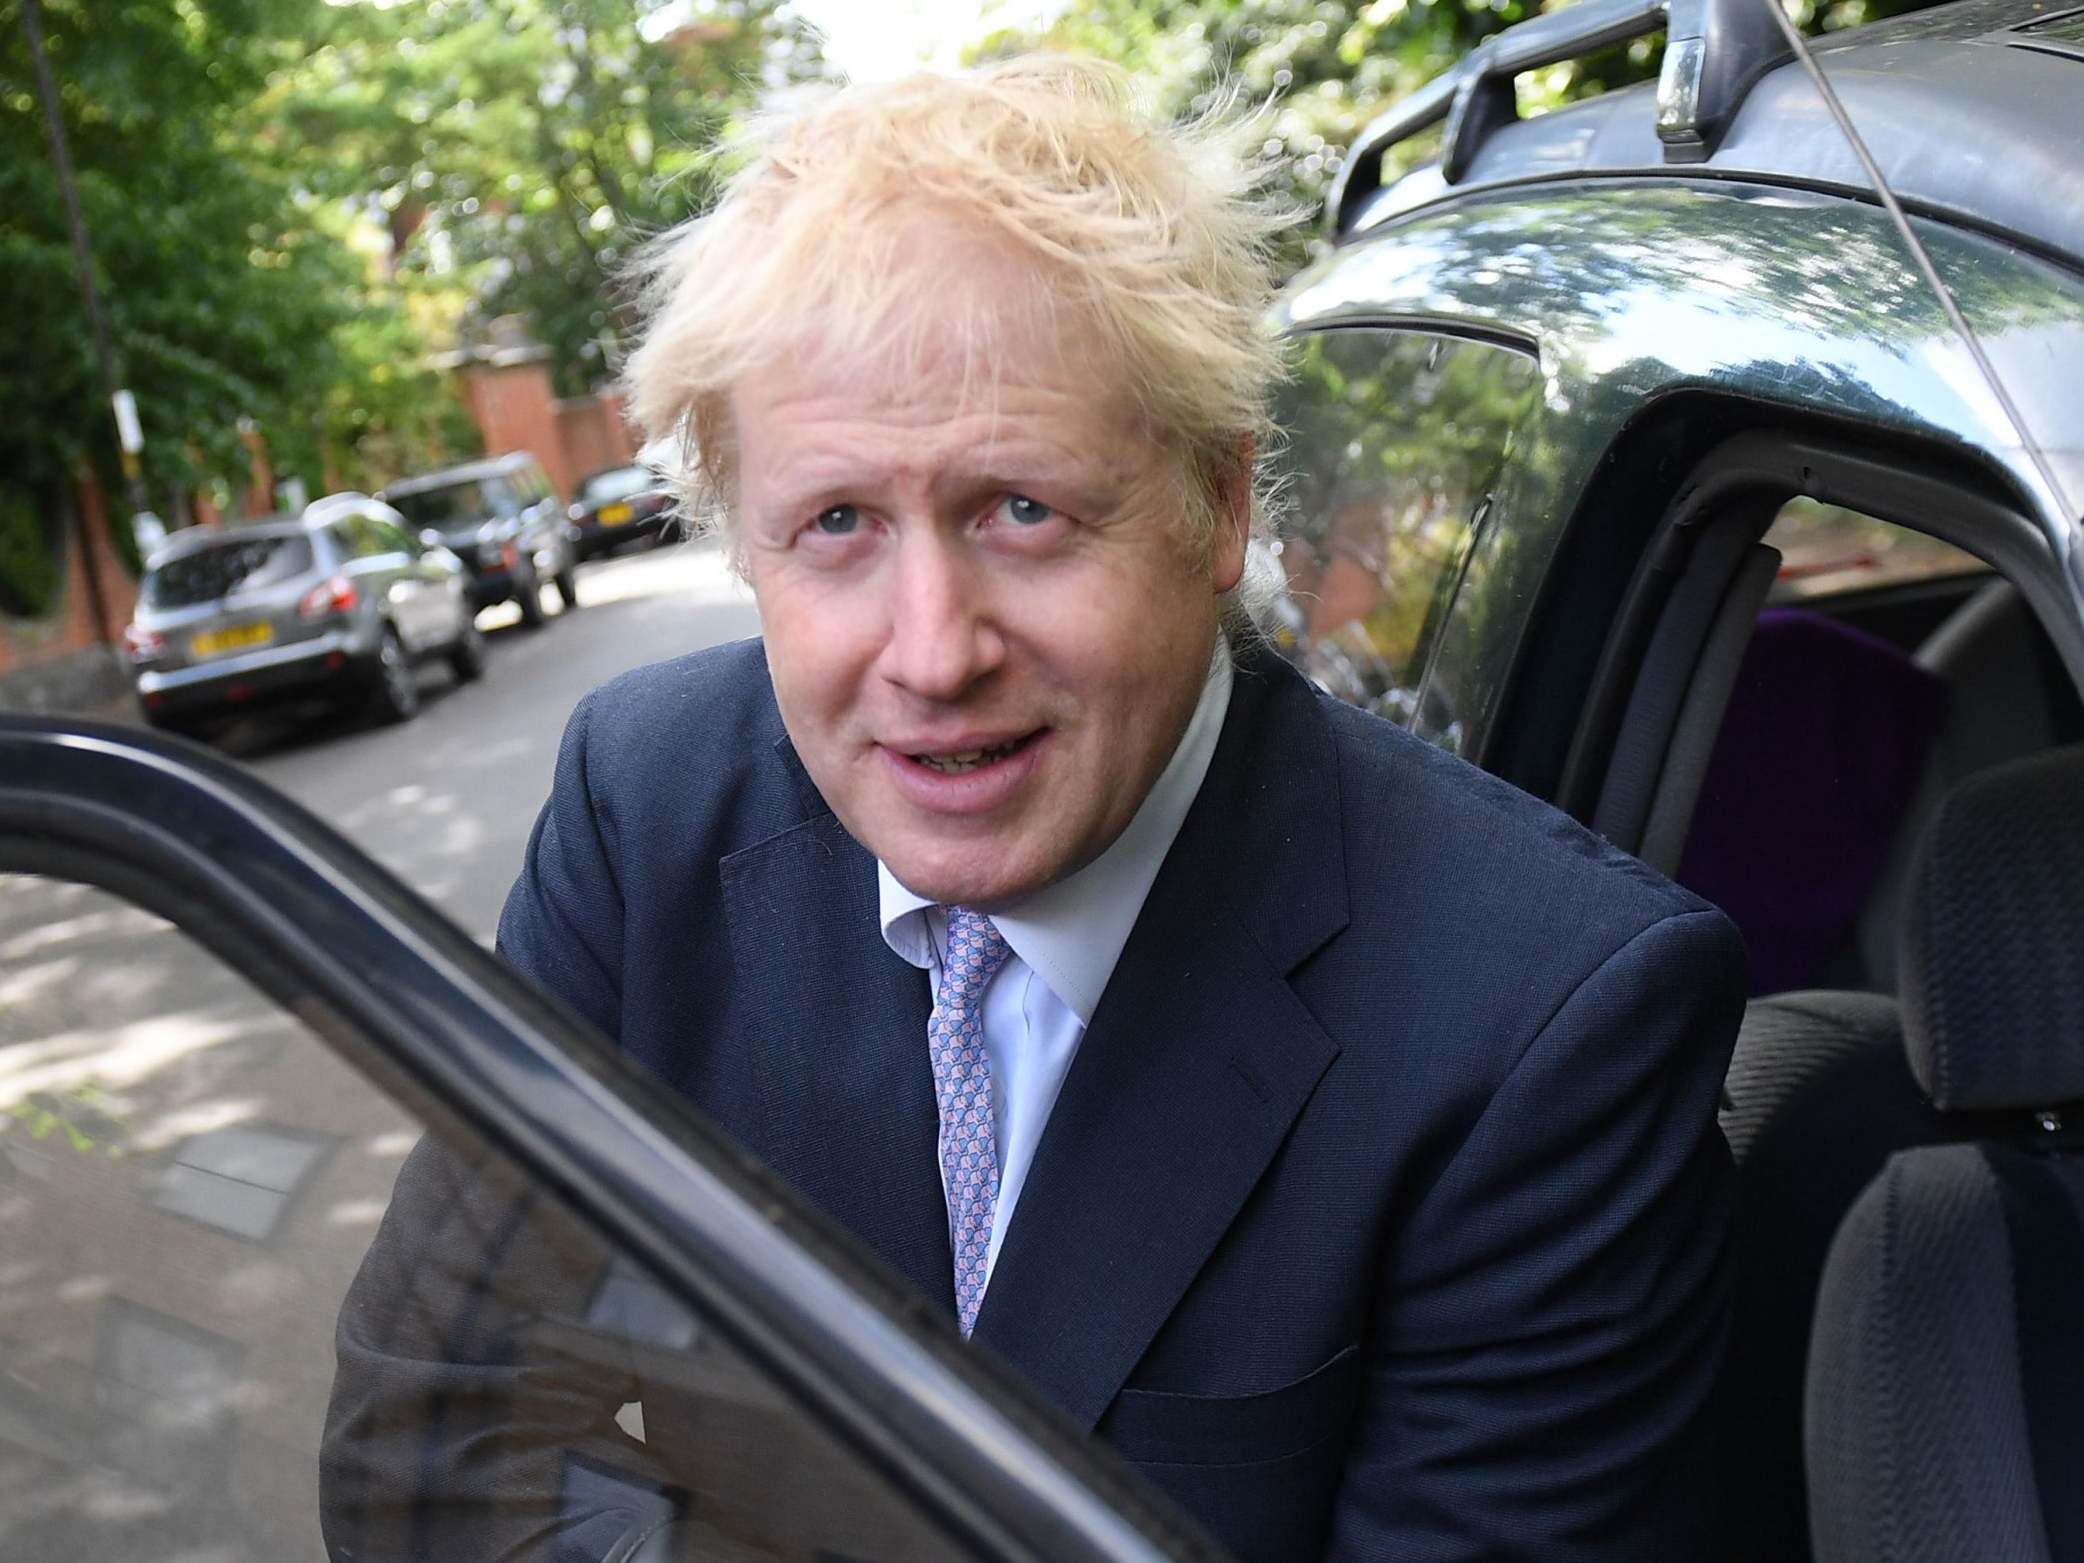 Boris Johnson, the former foreign secretary and London mayor, is running as Tory leader